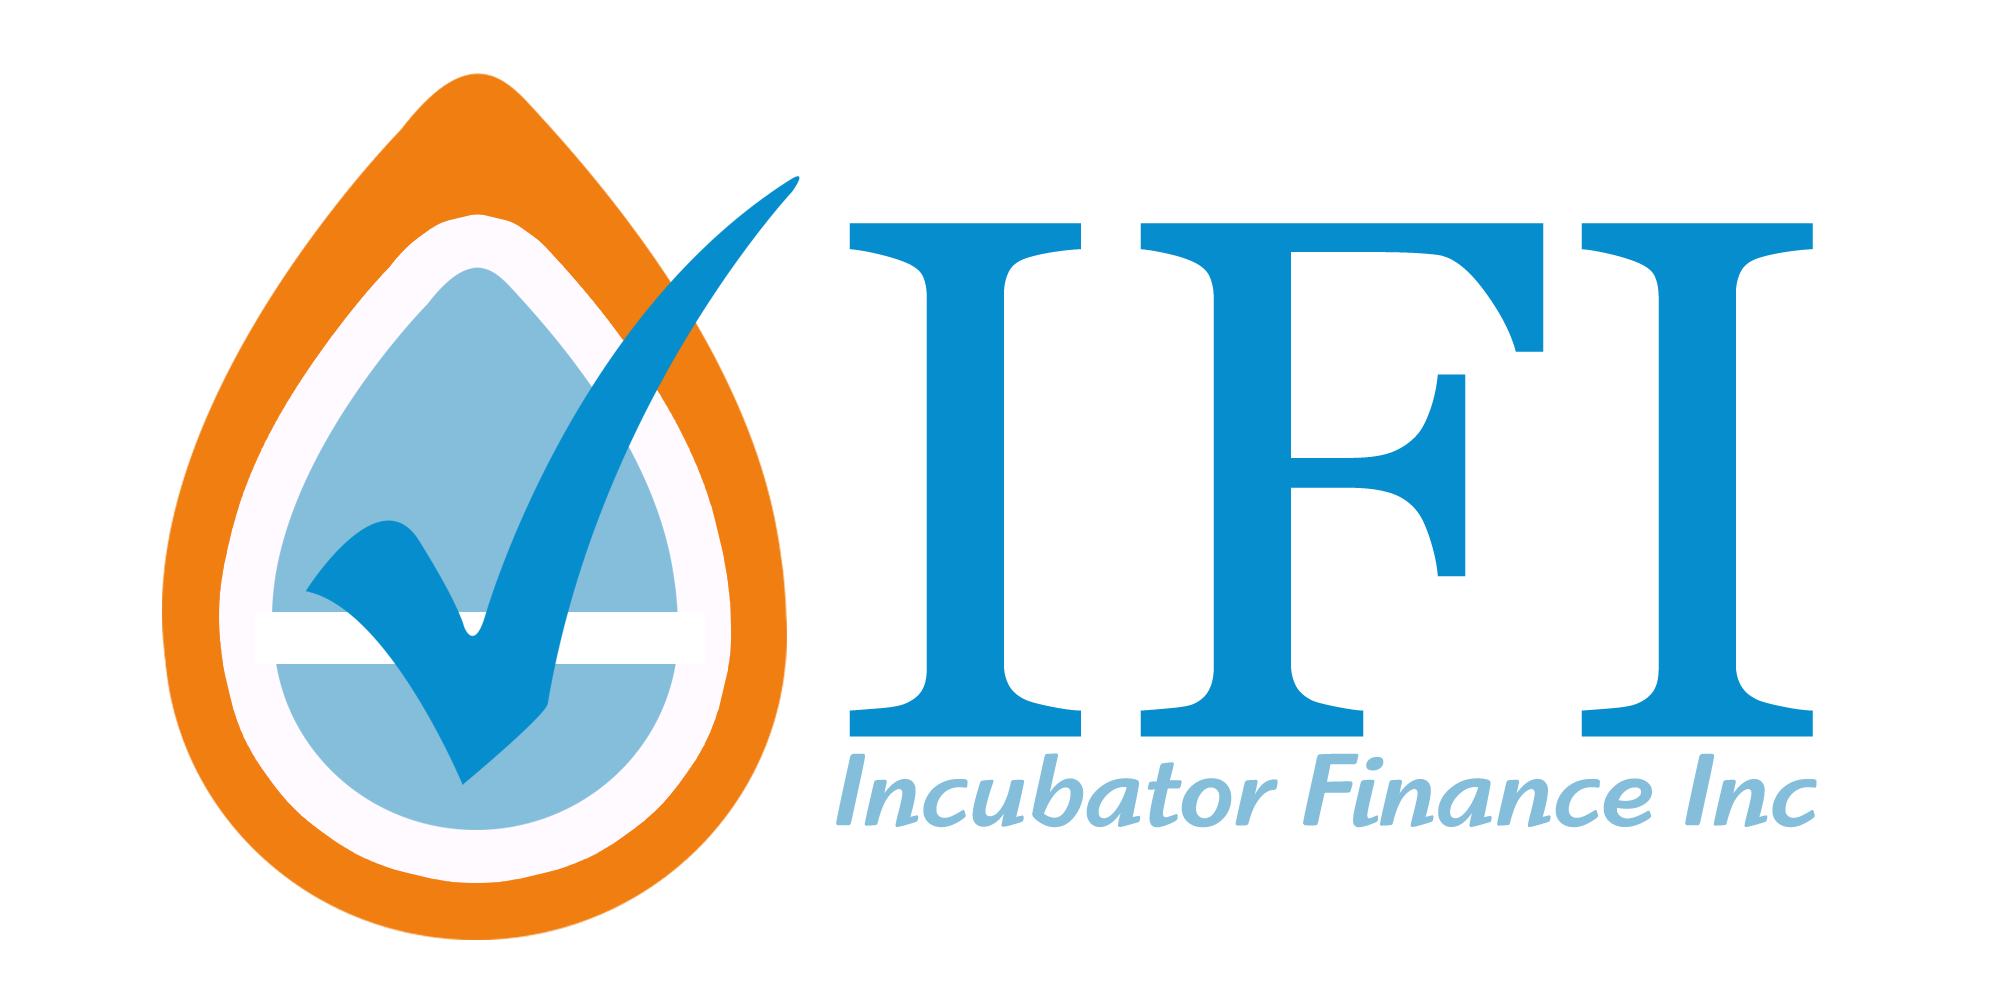 IFI Professionals chooses to Partner with AP Automation provider Yooz